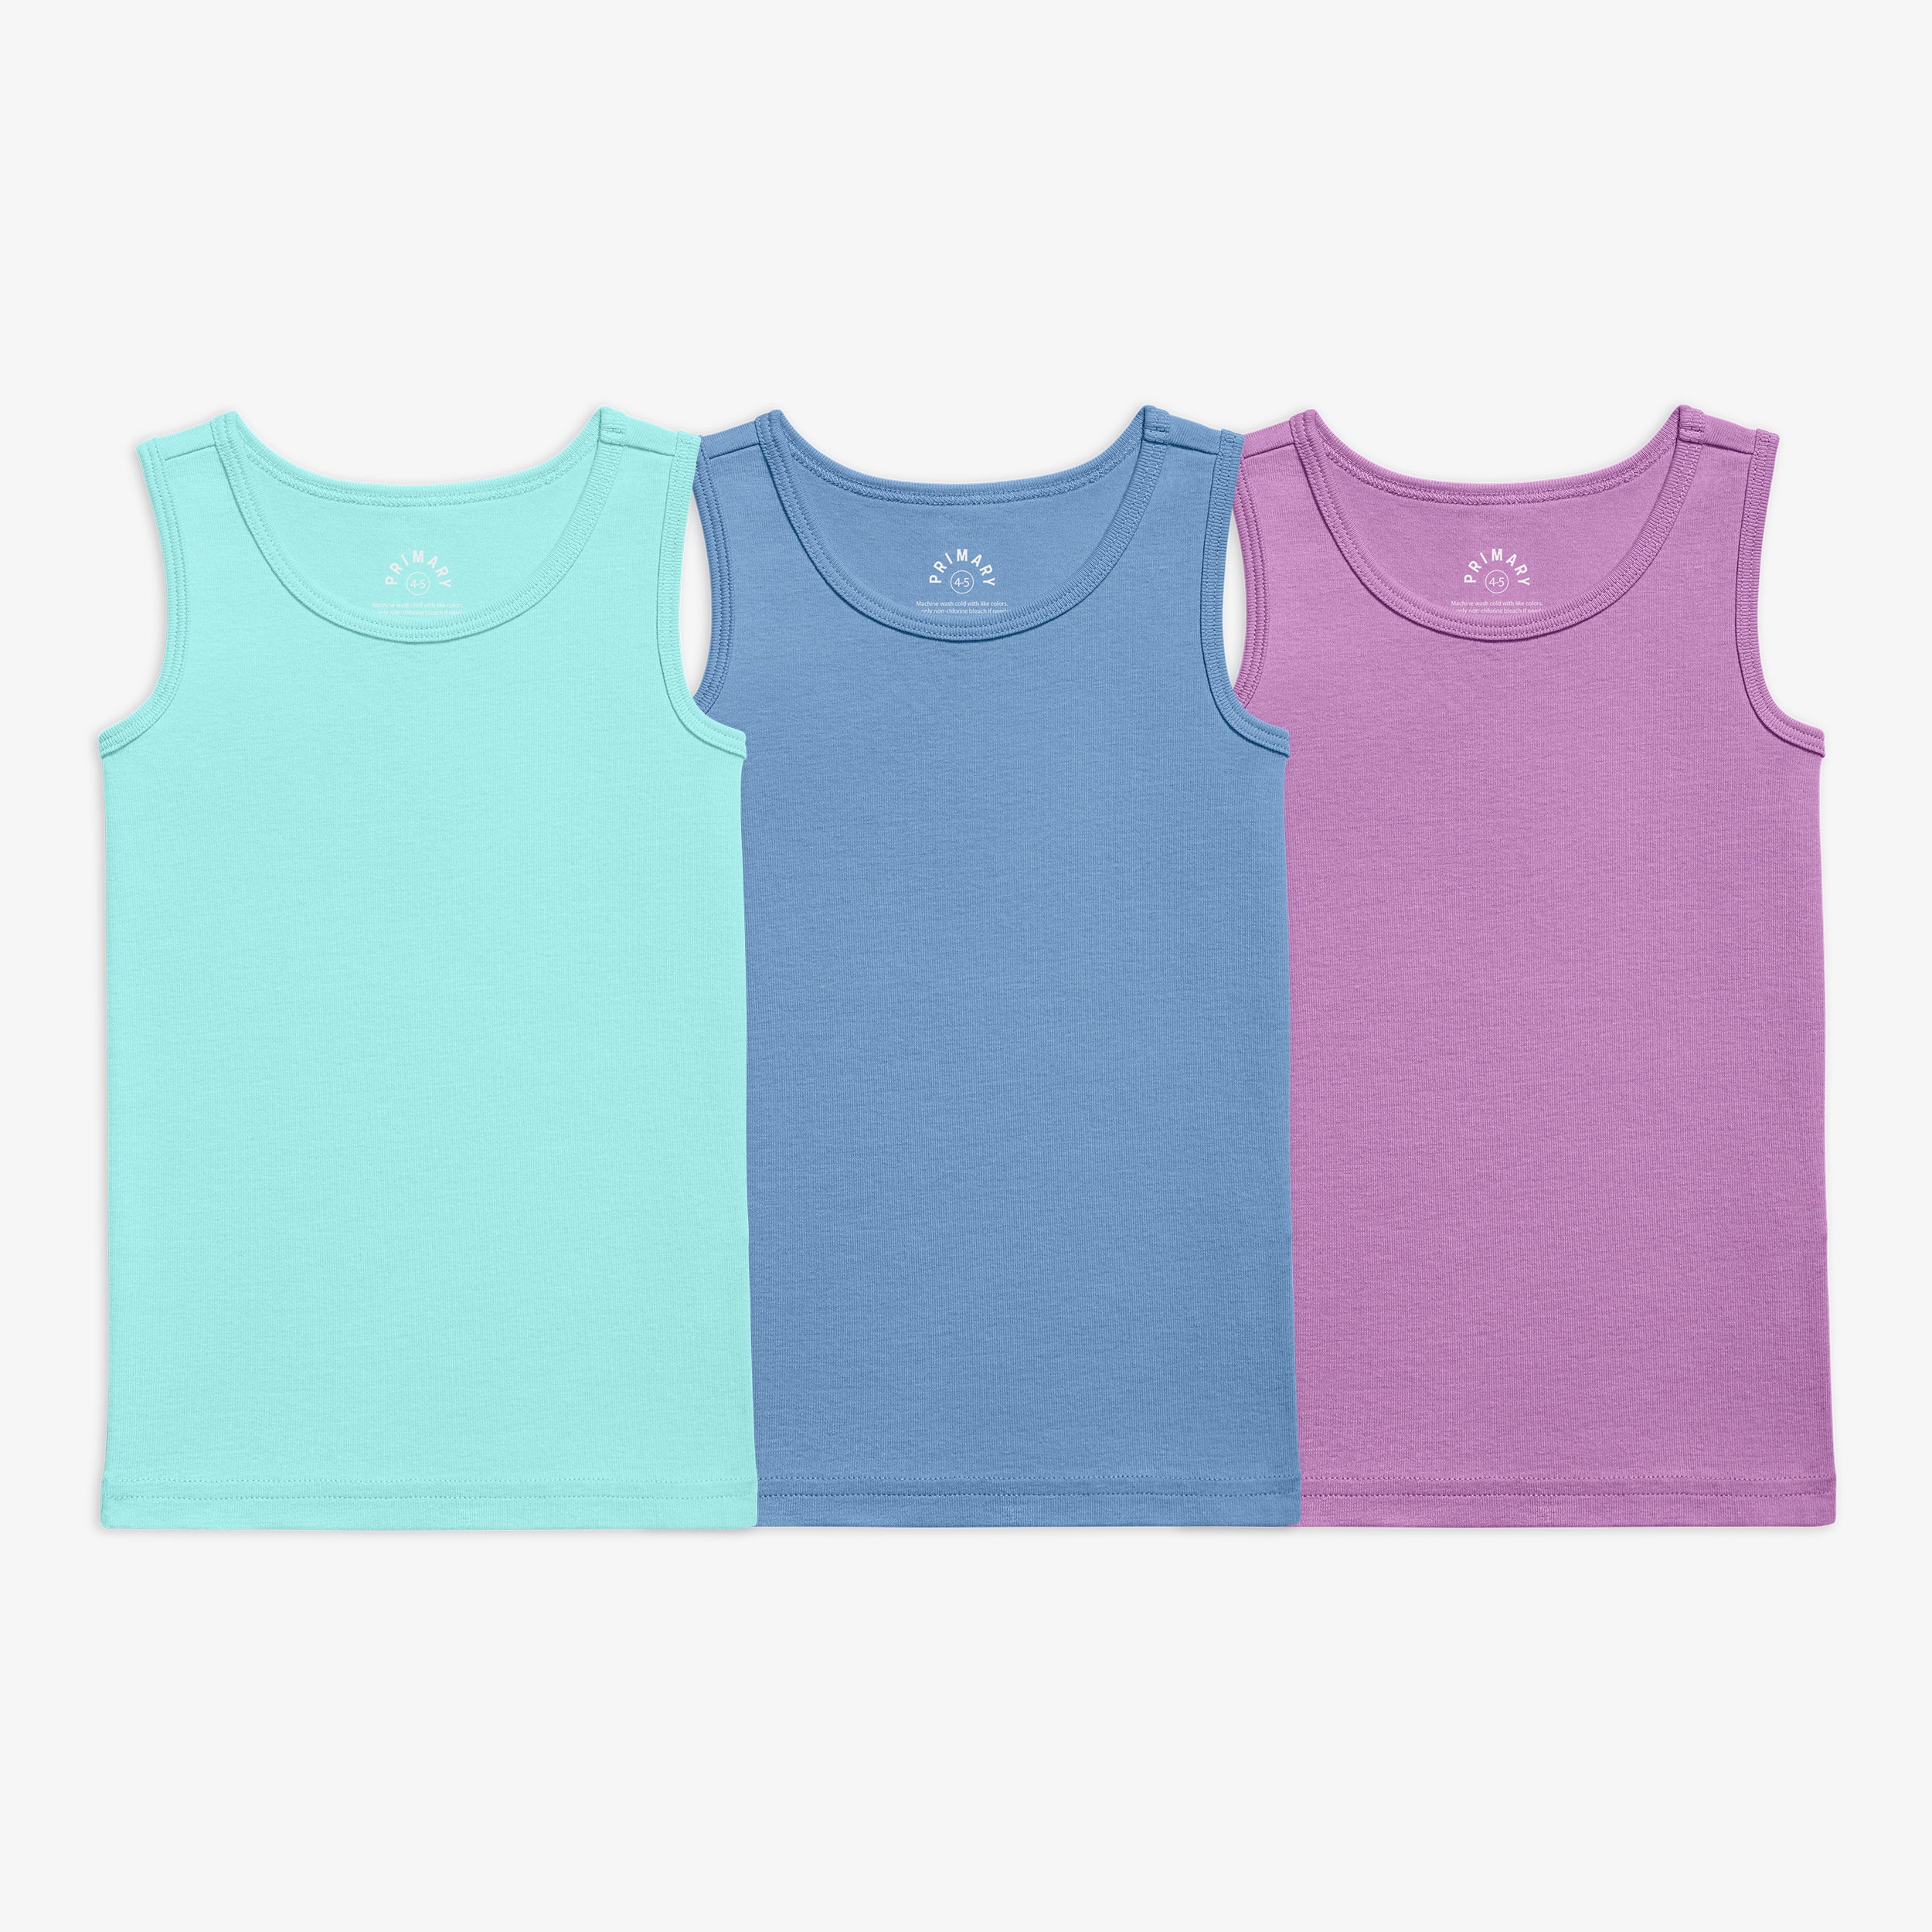 Fruit of the Loom Girls' Undershirts, Layering Tank Tops, 10 Pack